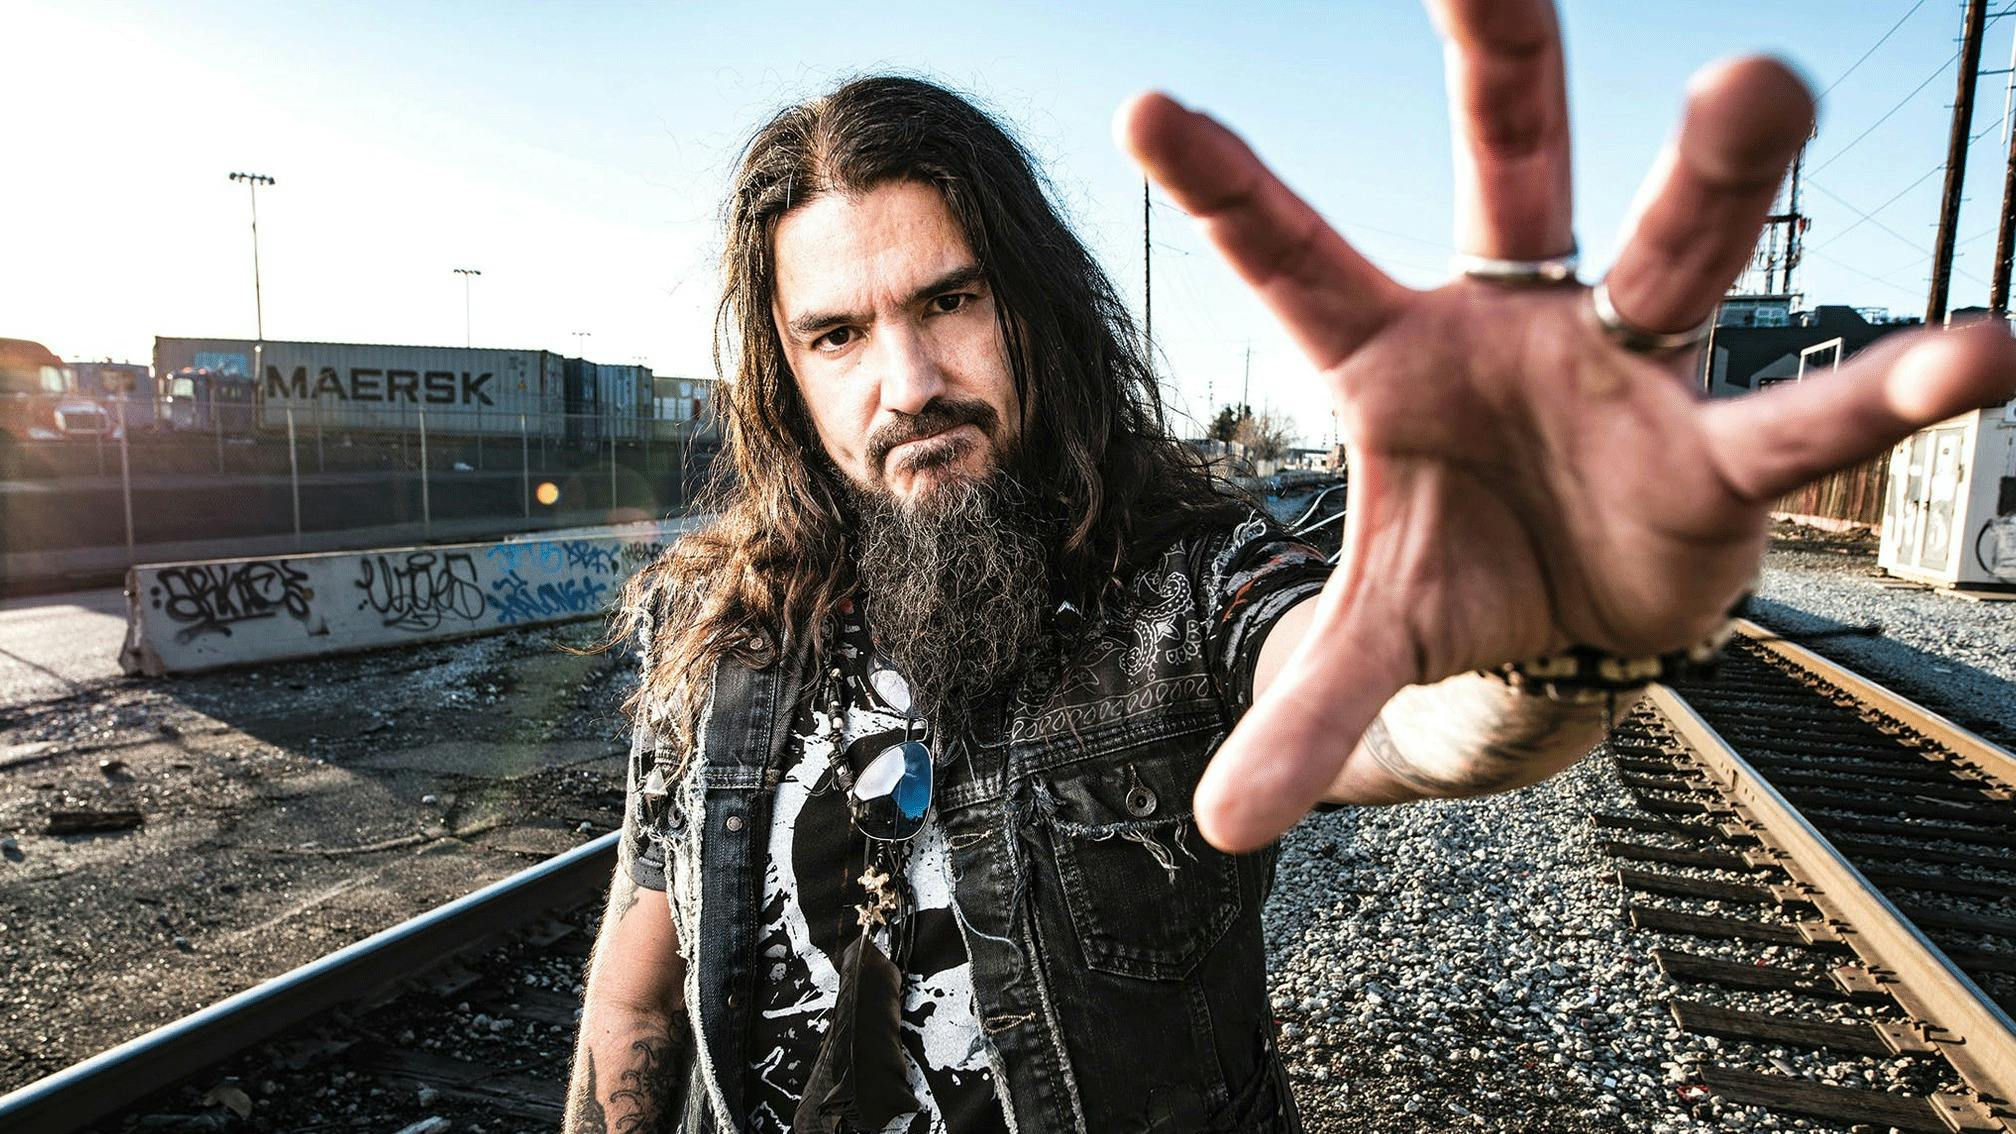 Robb Flynn on Machine Head’s new single: “We just wanted to f*cking rip people’s faces off!”